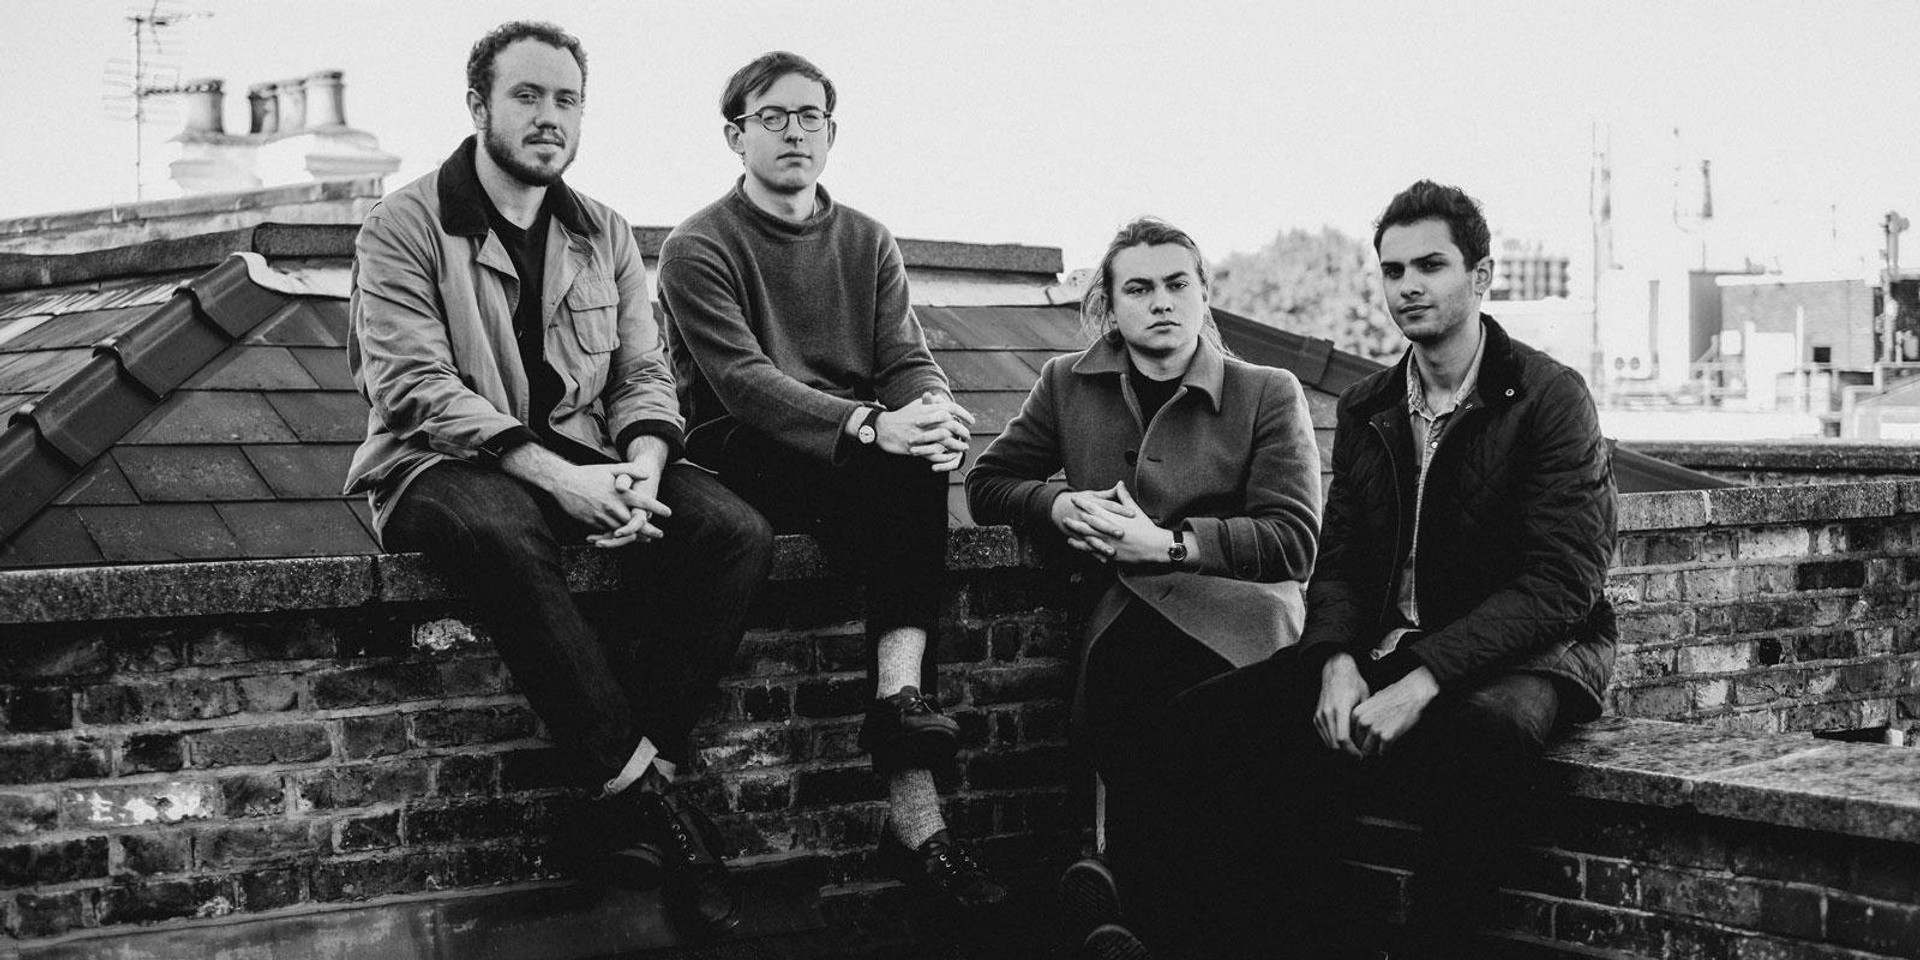 Bombay Bicycle Club returns with first new single in five years, 'Eat, Sleep, Wake (Nothing But You)' – listen